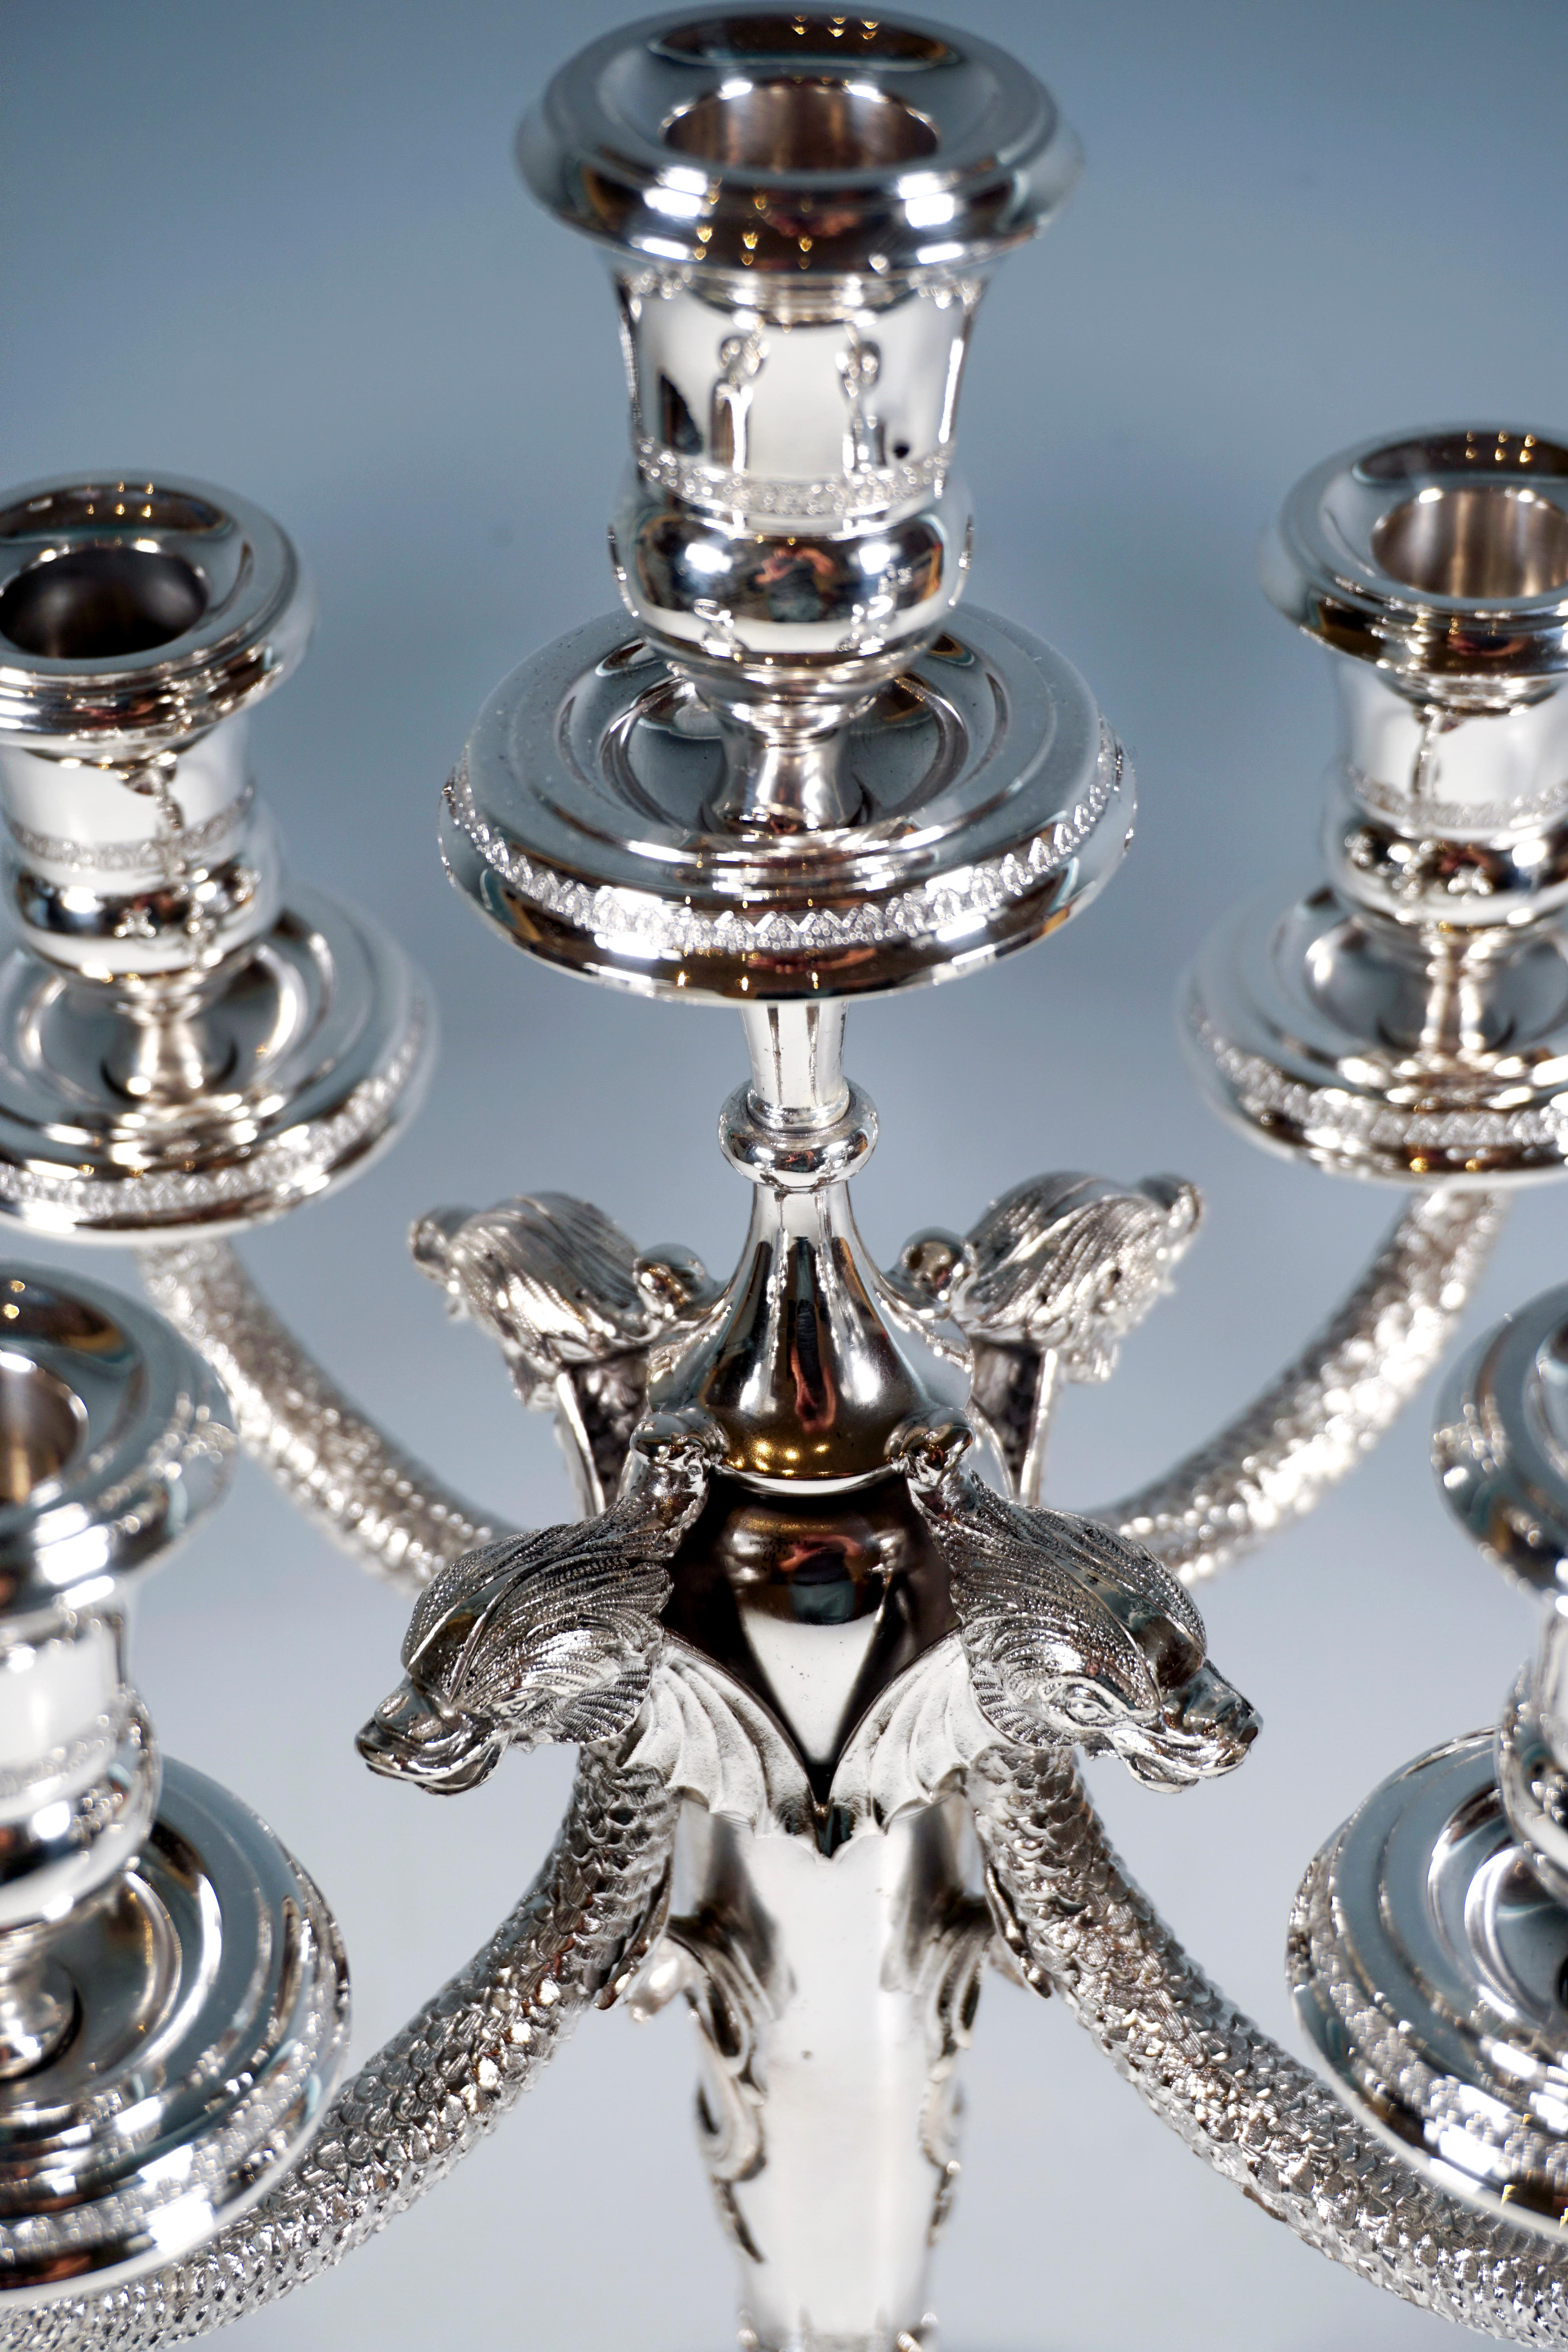 Belgian Pair of 5-Flame Silver Candelabras with Dolphin Arms, Belgium Around 1950 For Sale